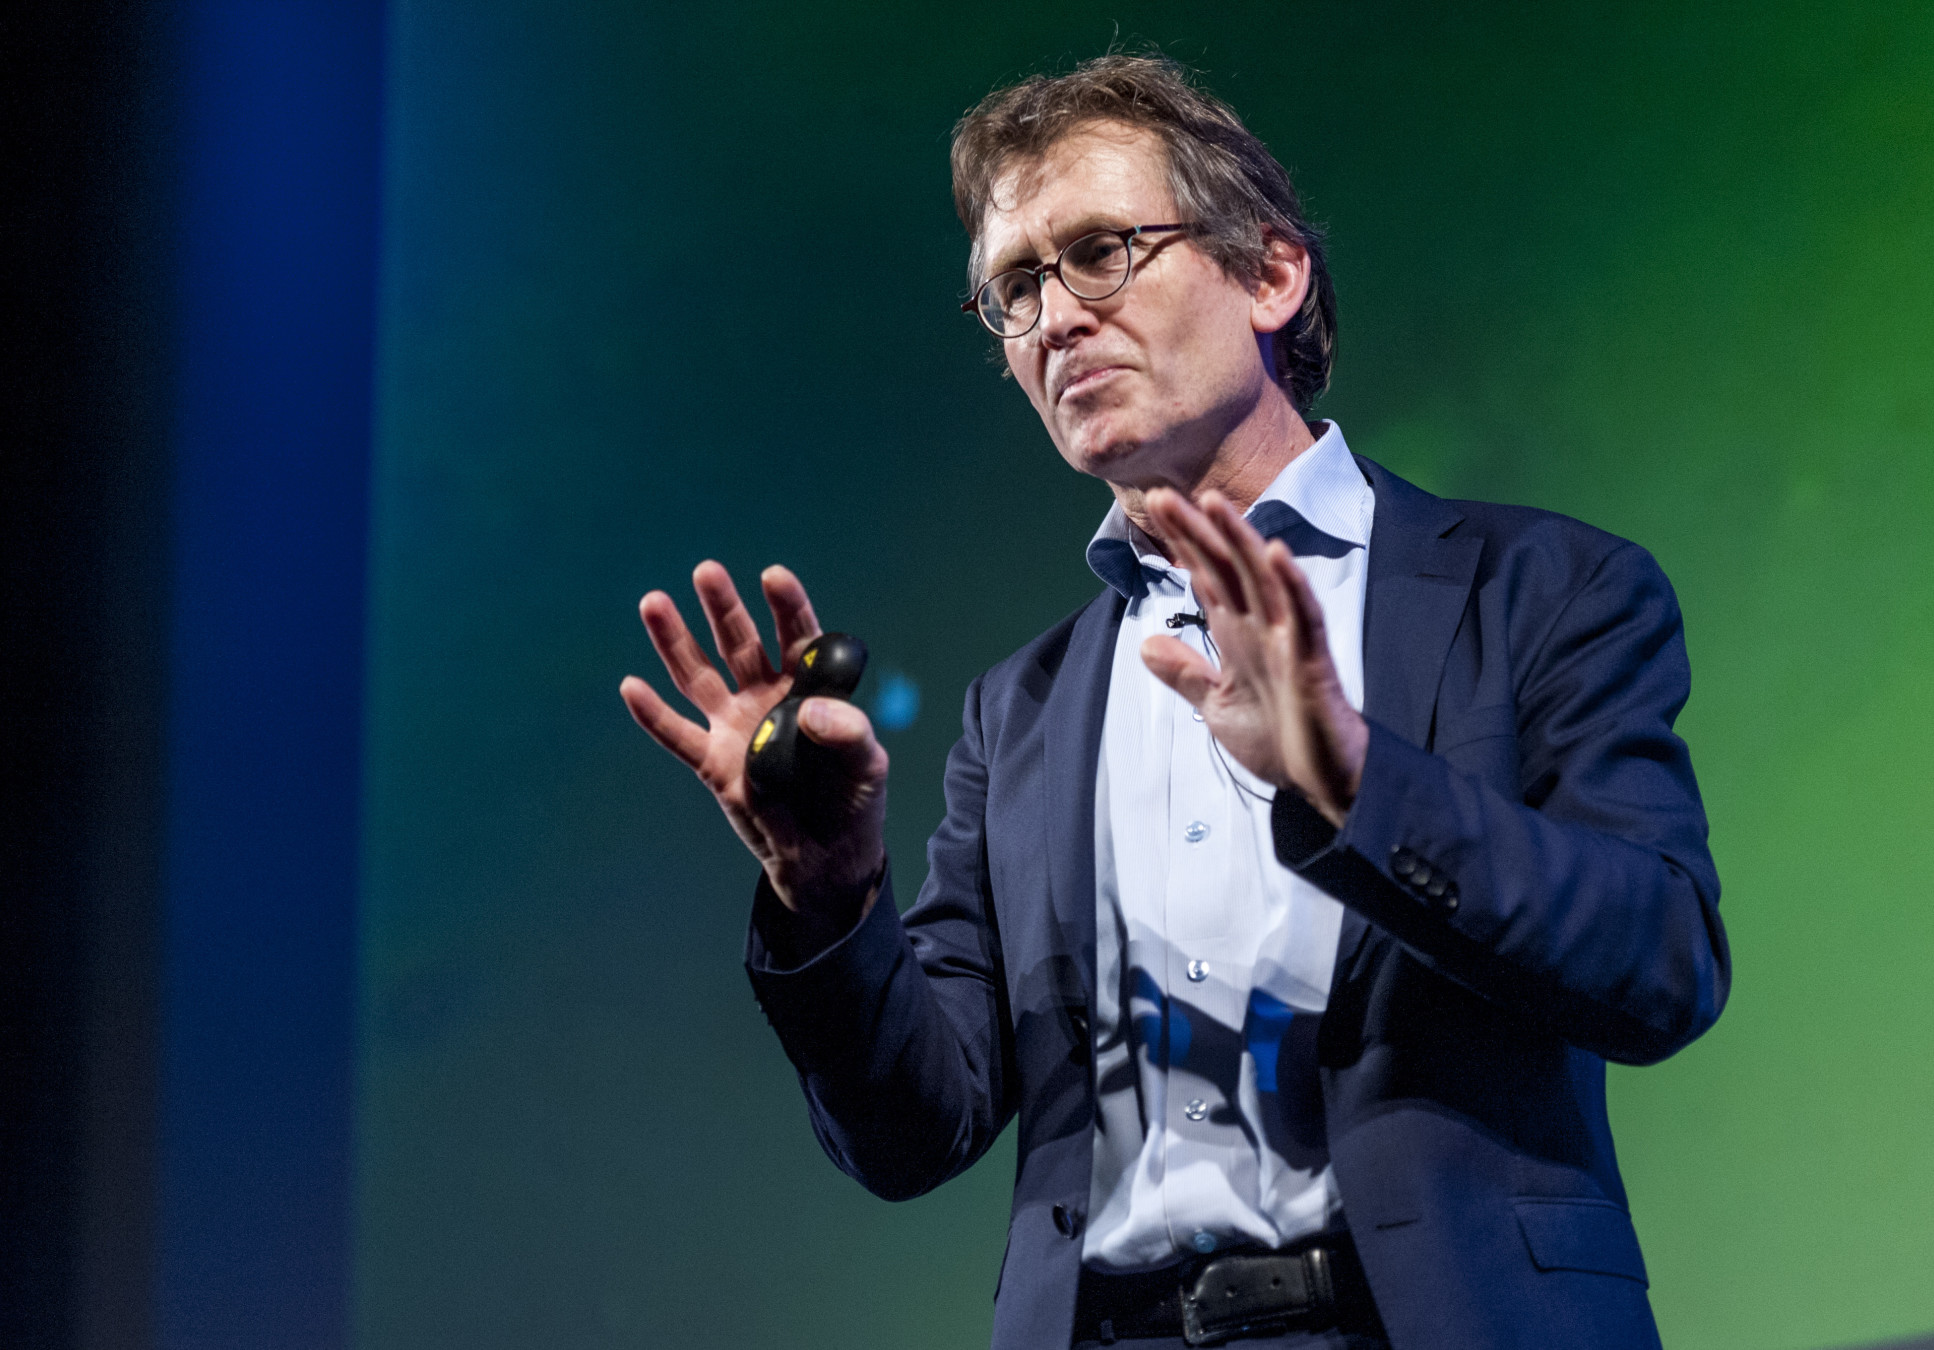 Professor Ben Feringa, winner of the Nobel Prize in Chemistry, gives the 2018 Schrodinger Lecture, 'The Art of Building Small'.